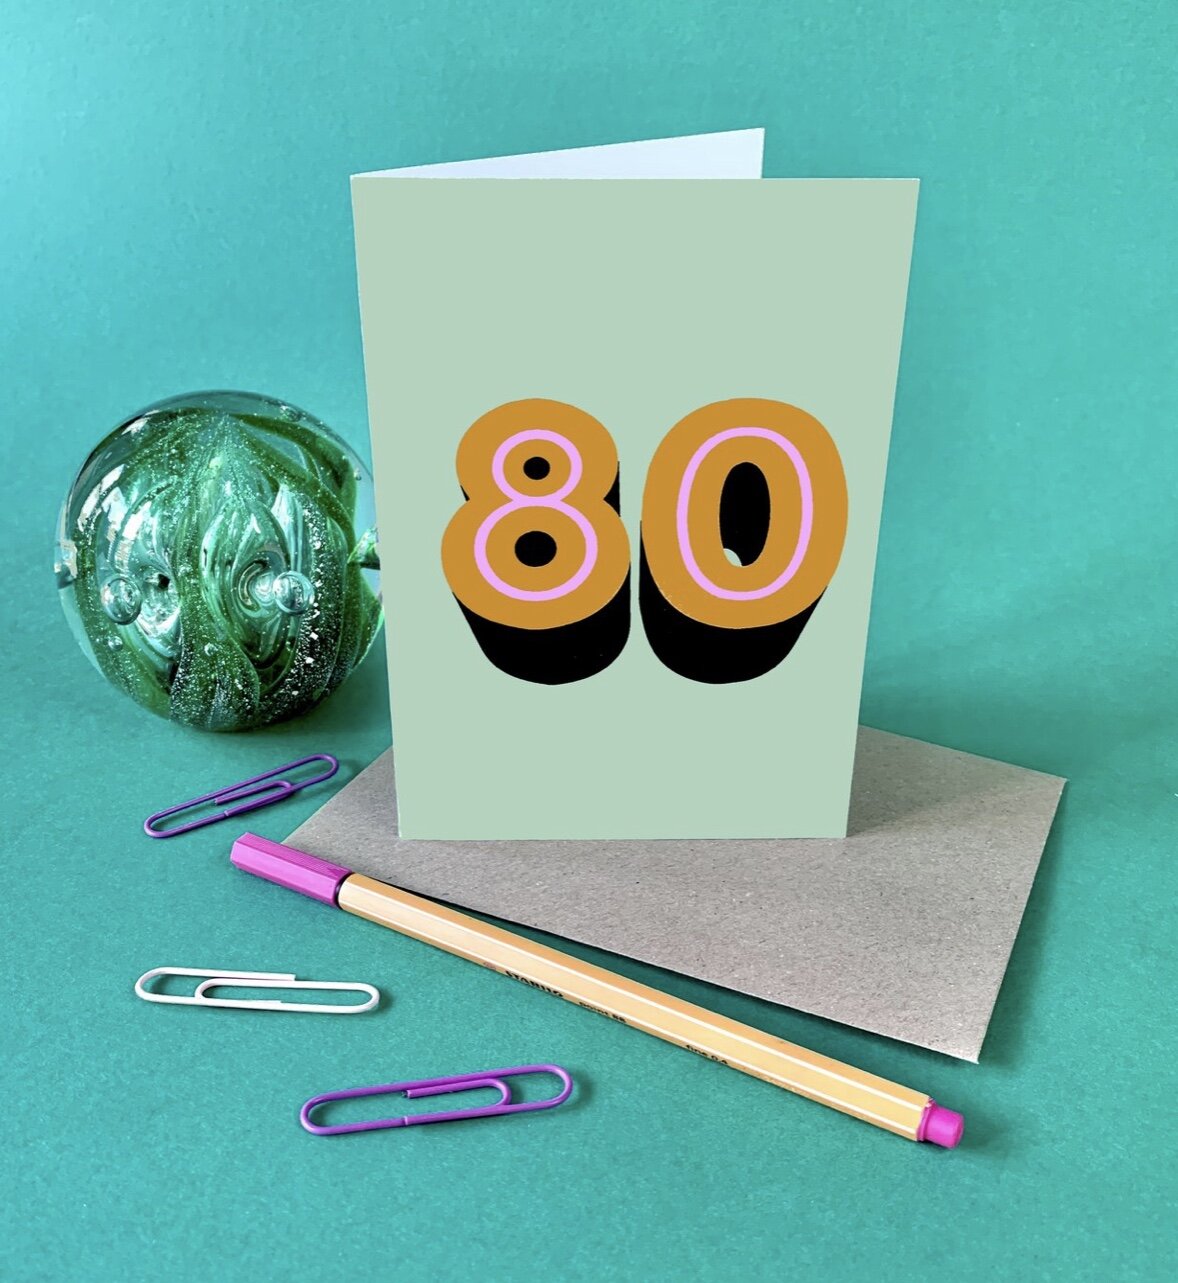 80 | CARD BY MAX MADE ME DO IT